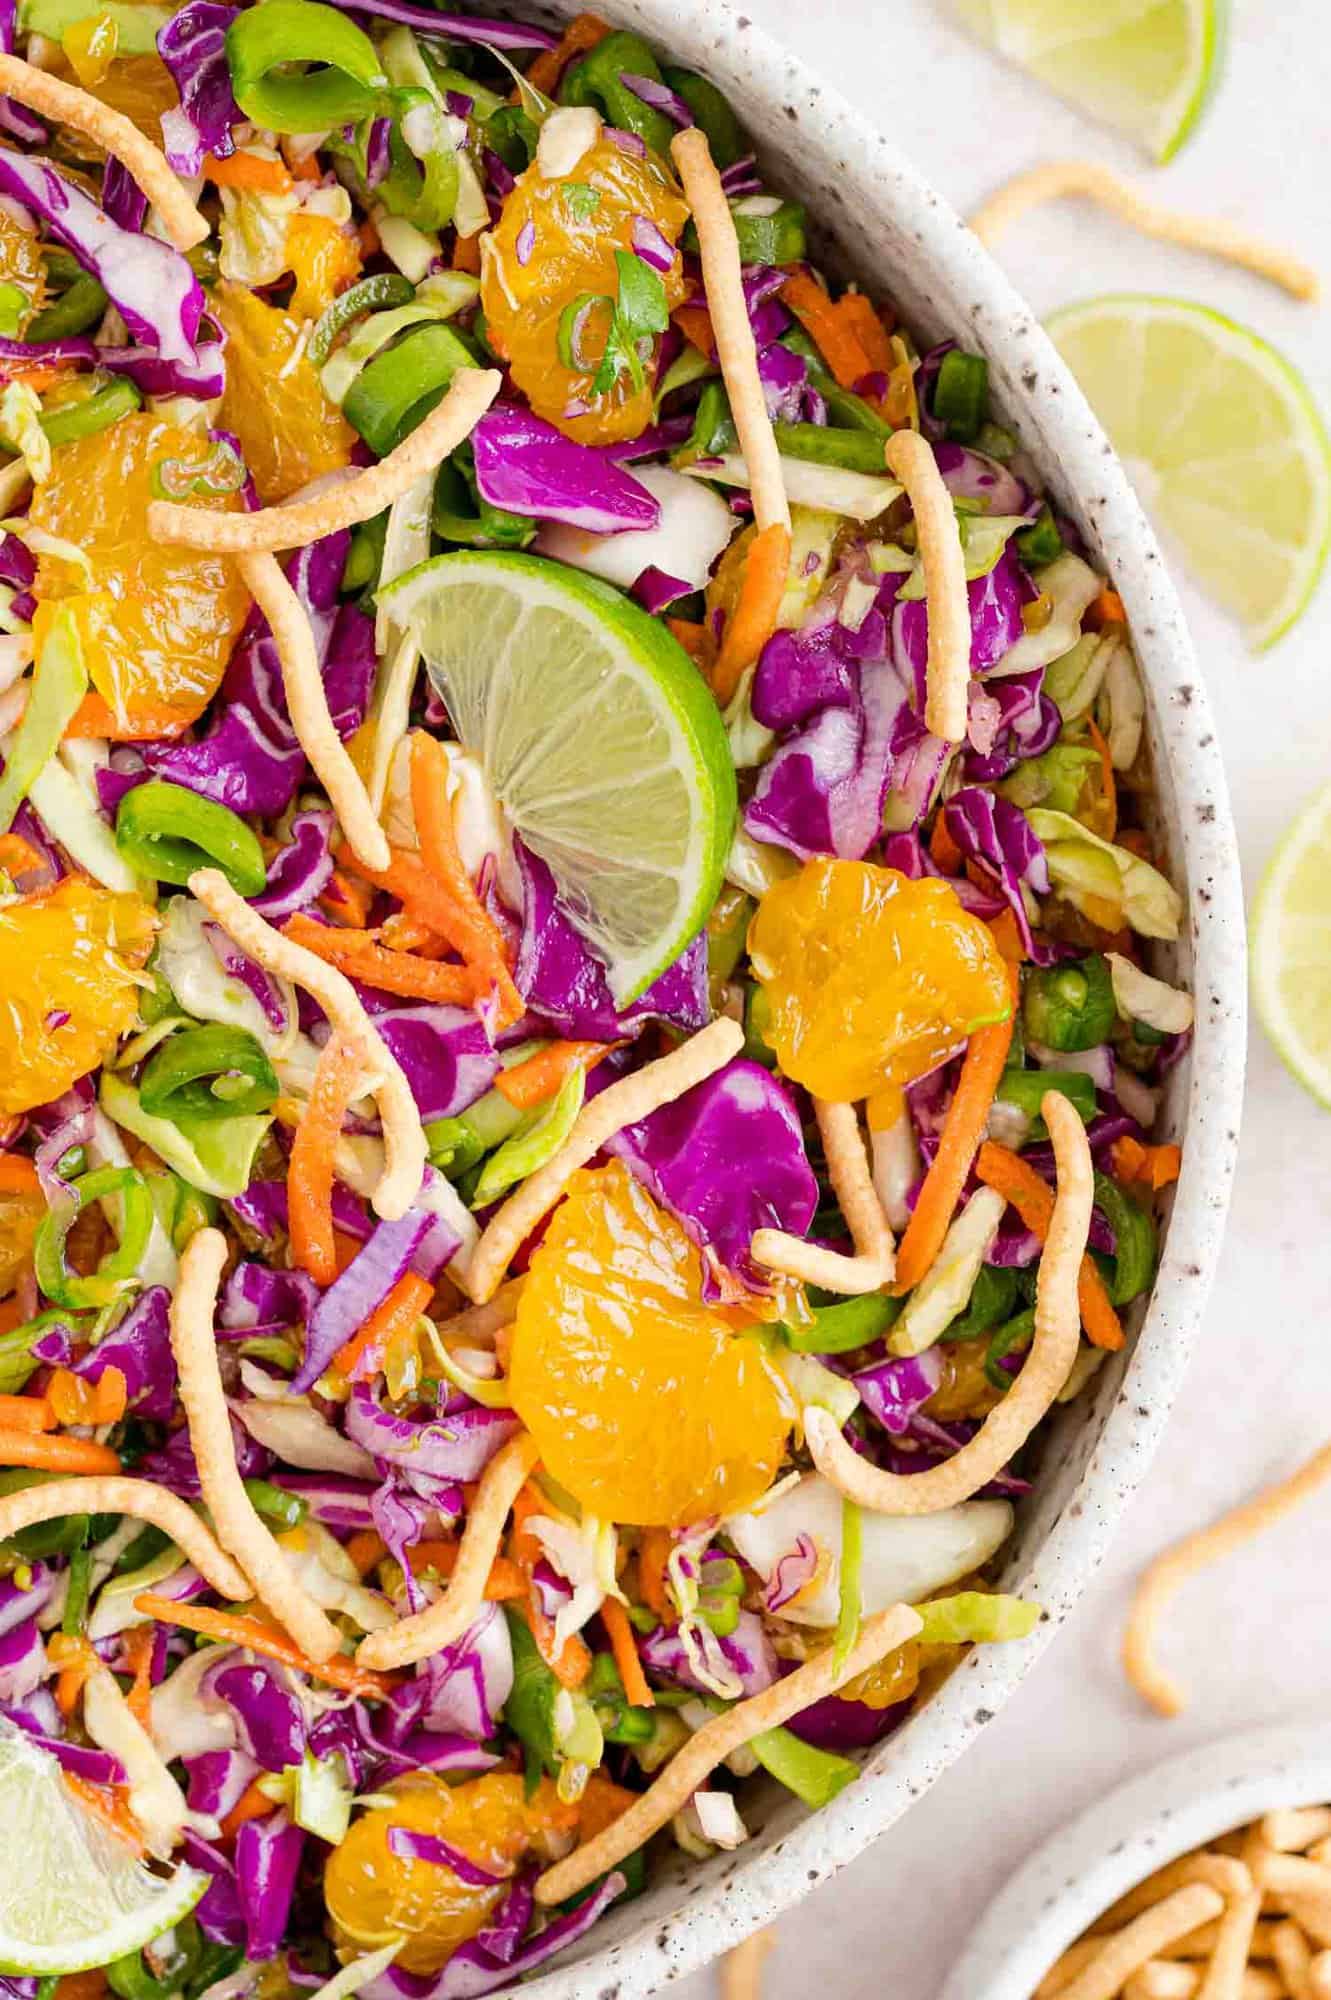 Cabbage salad with mandarin oranges and lime.